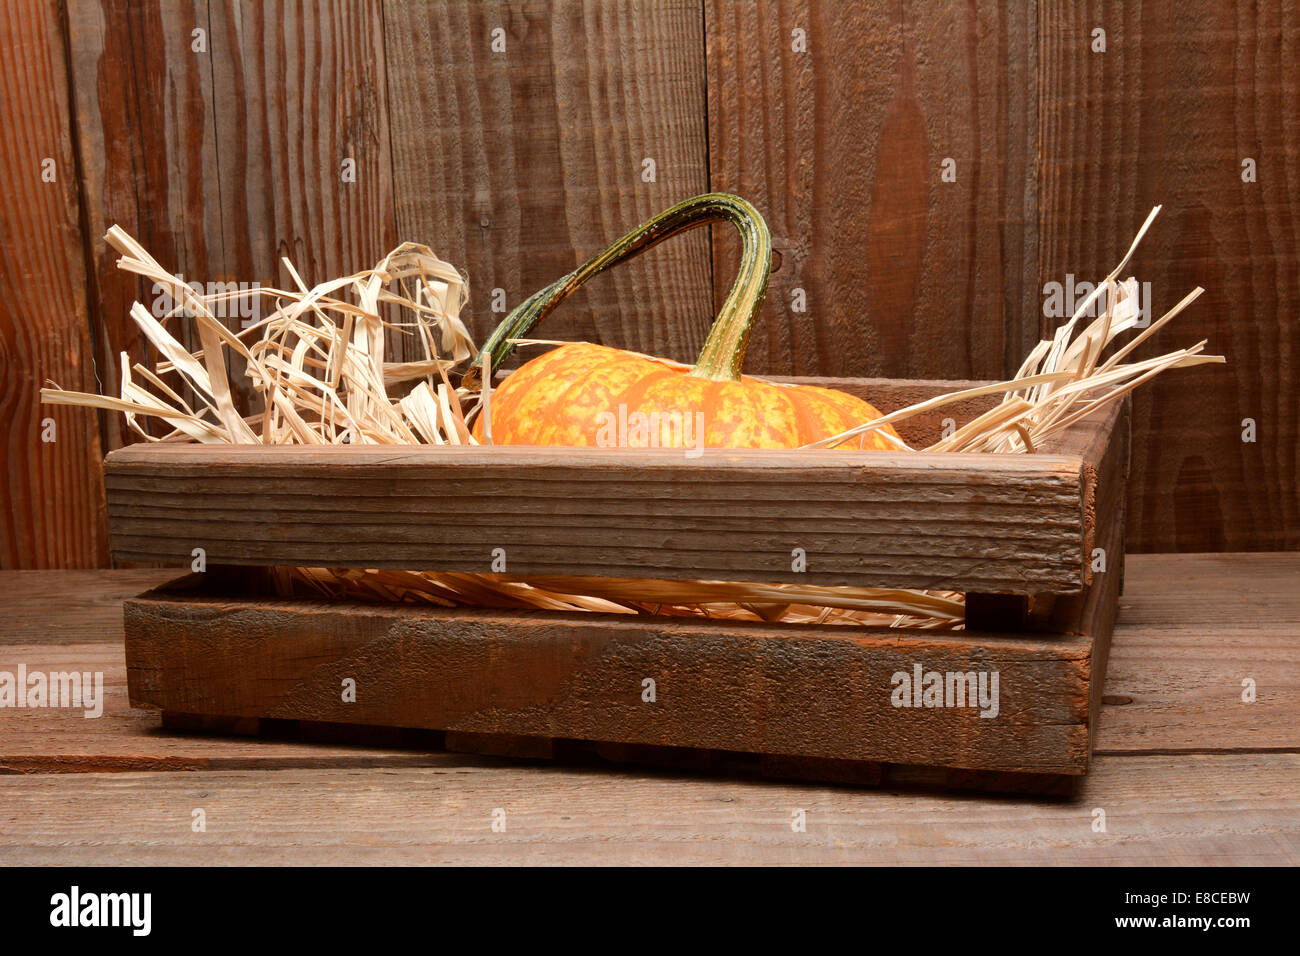 Closeup of a decorative pumpkin in a wooden crate with straw in a rustic wood barn setting. Stock Photo